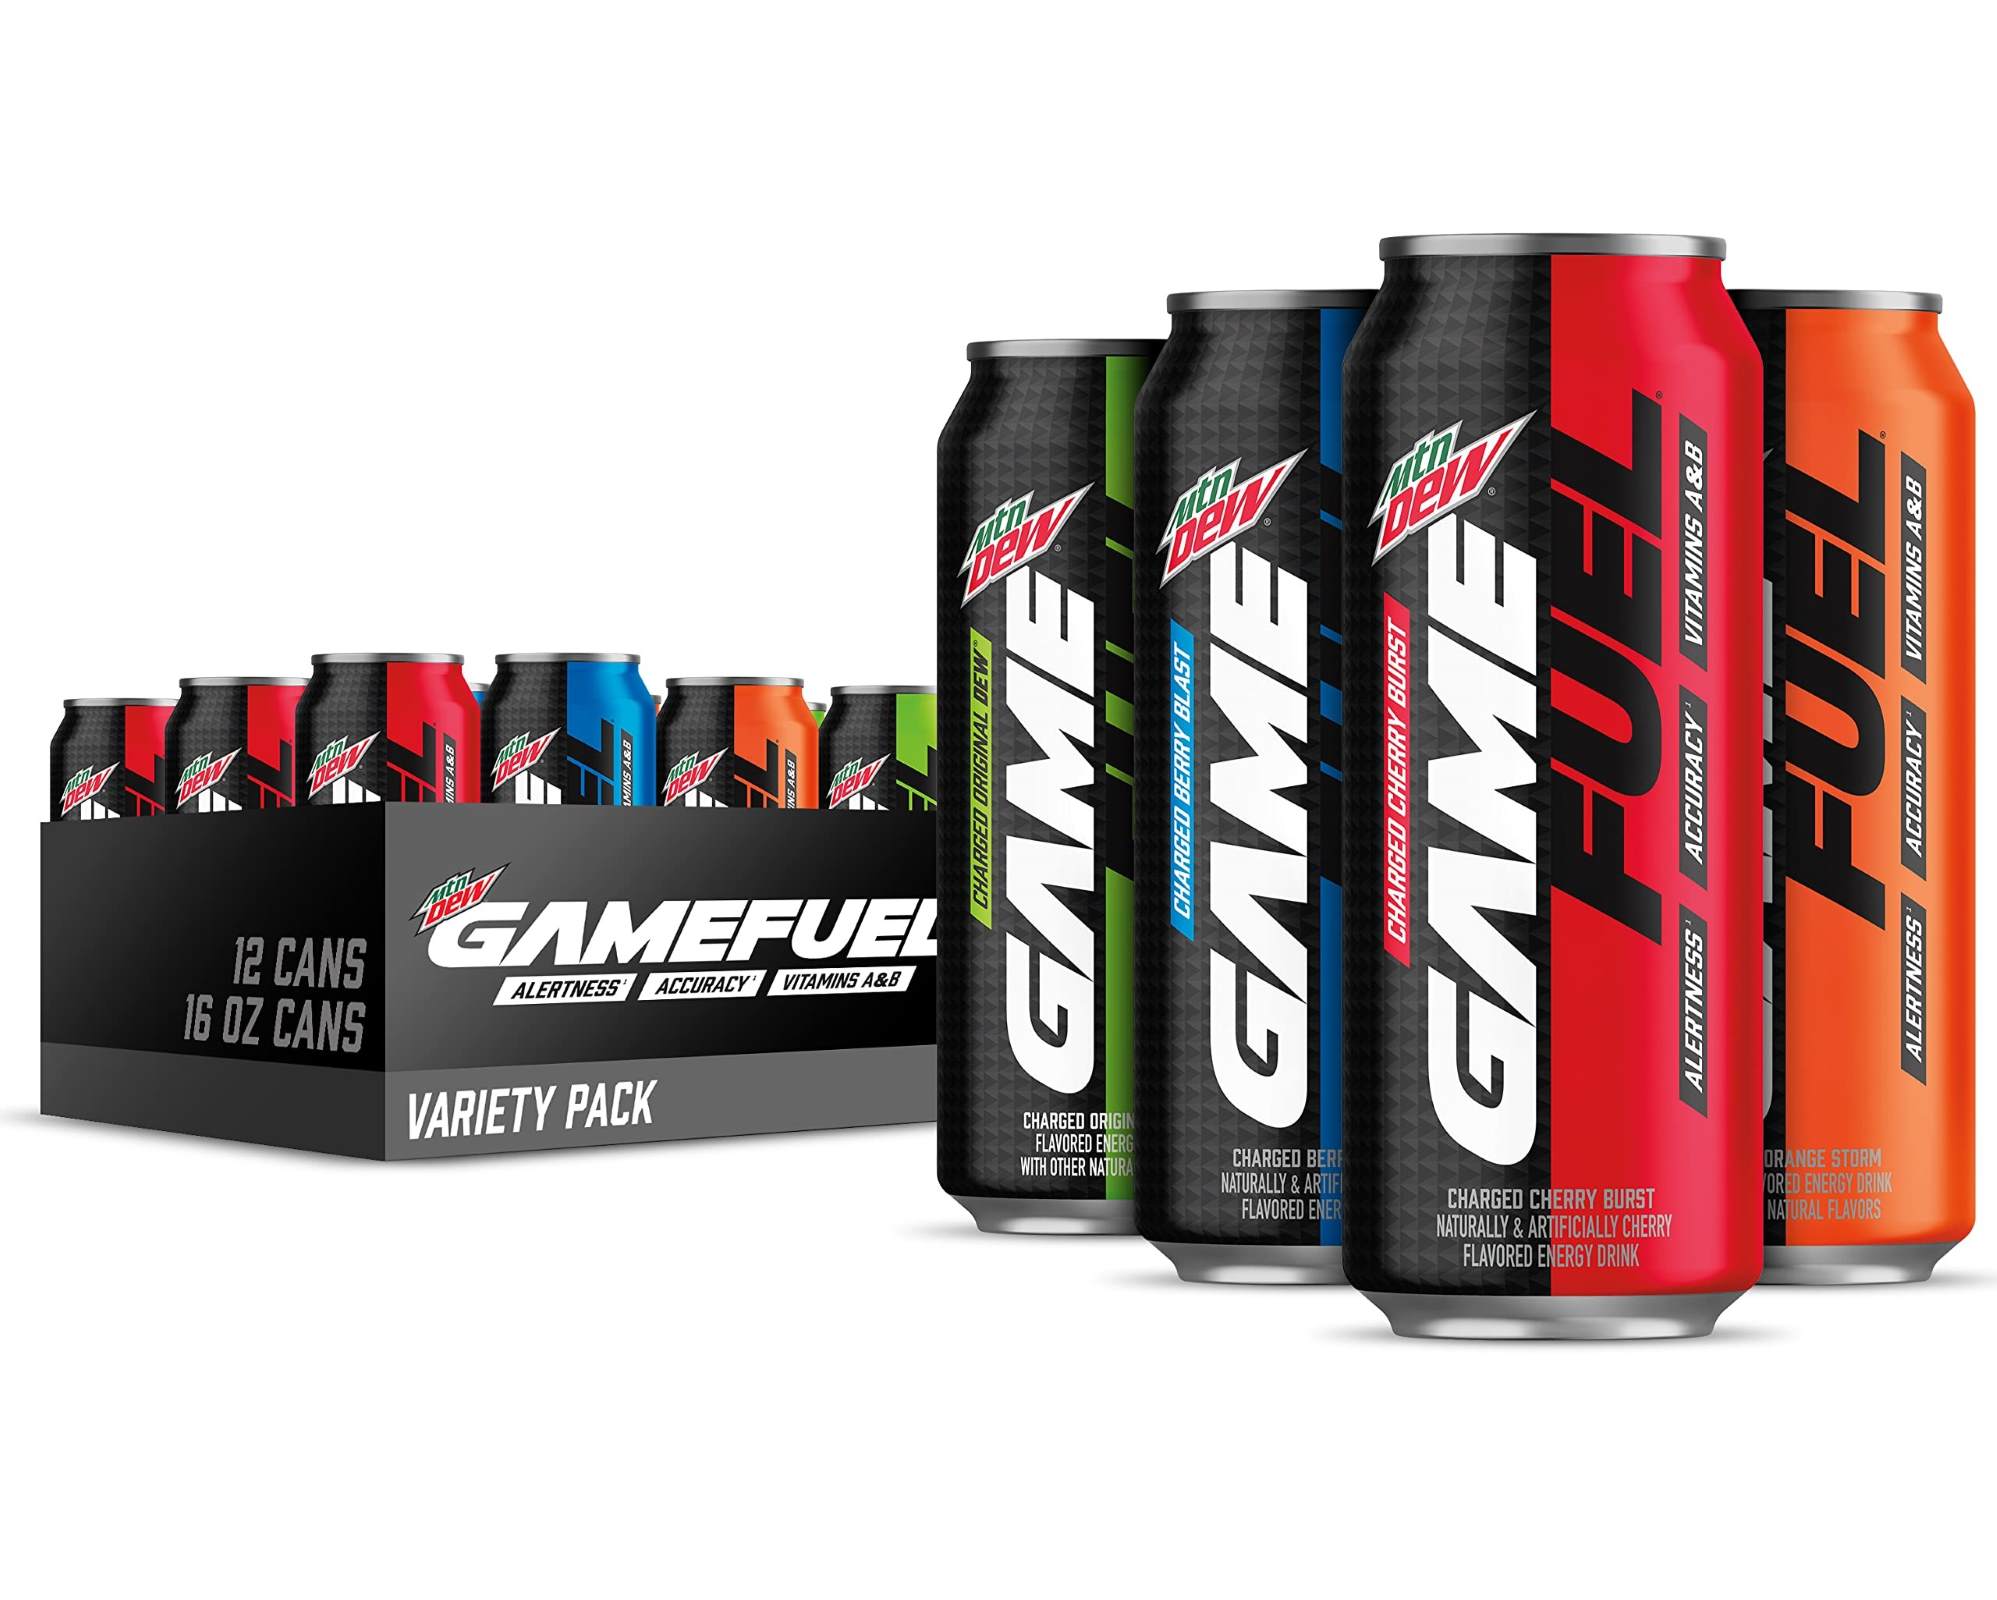 19-game-fuel-nutrition-facts